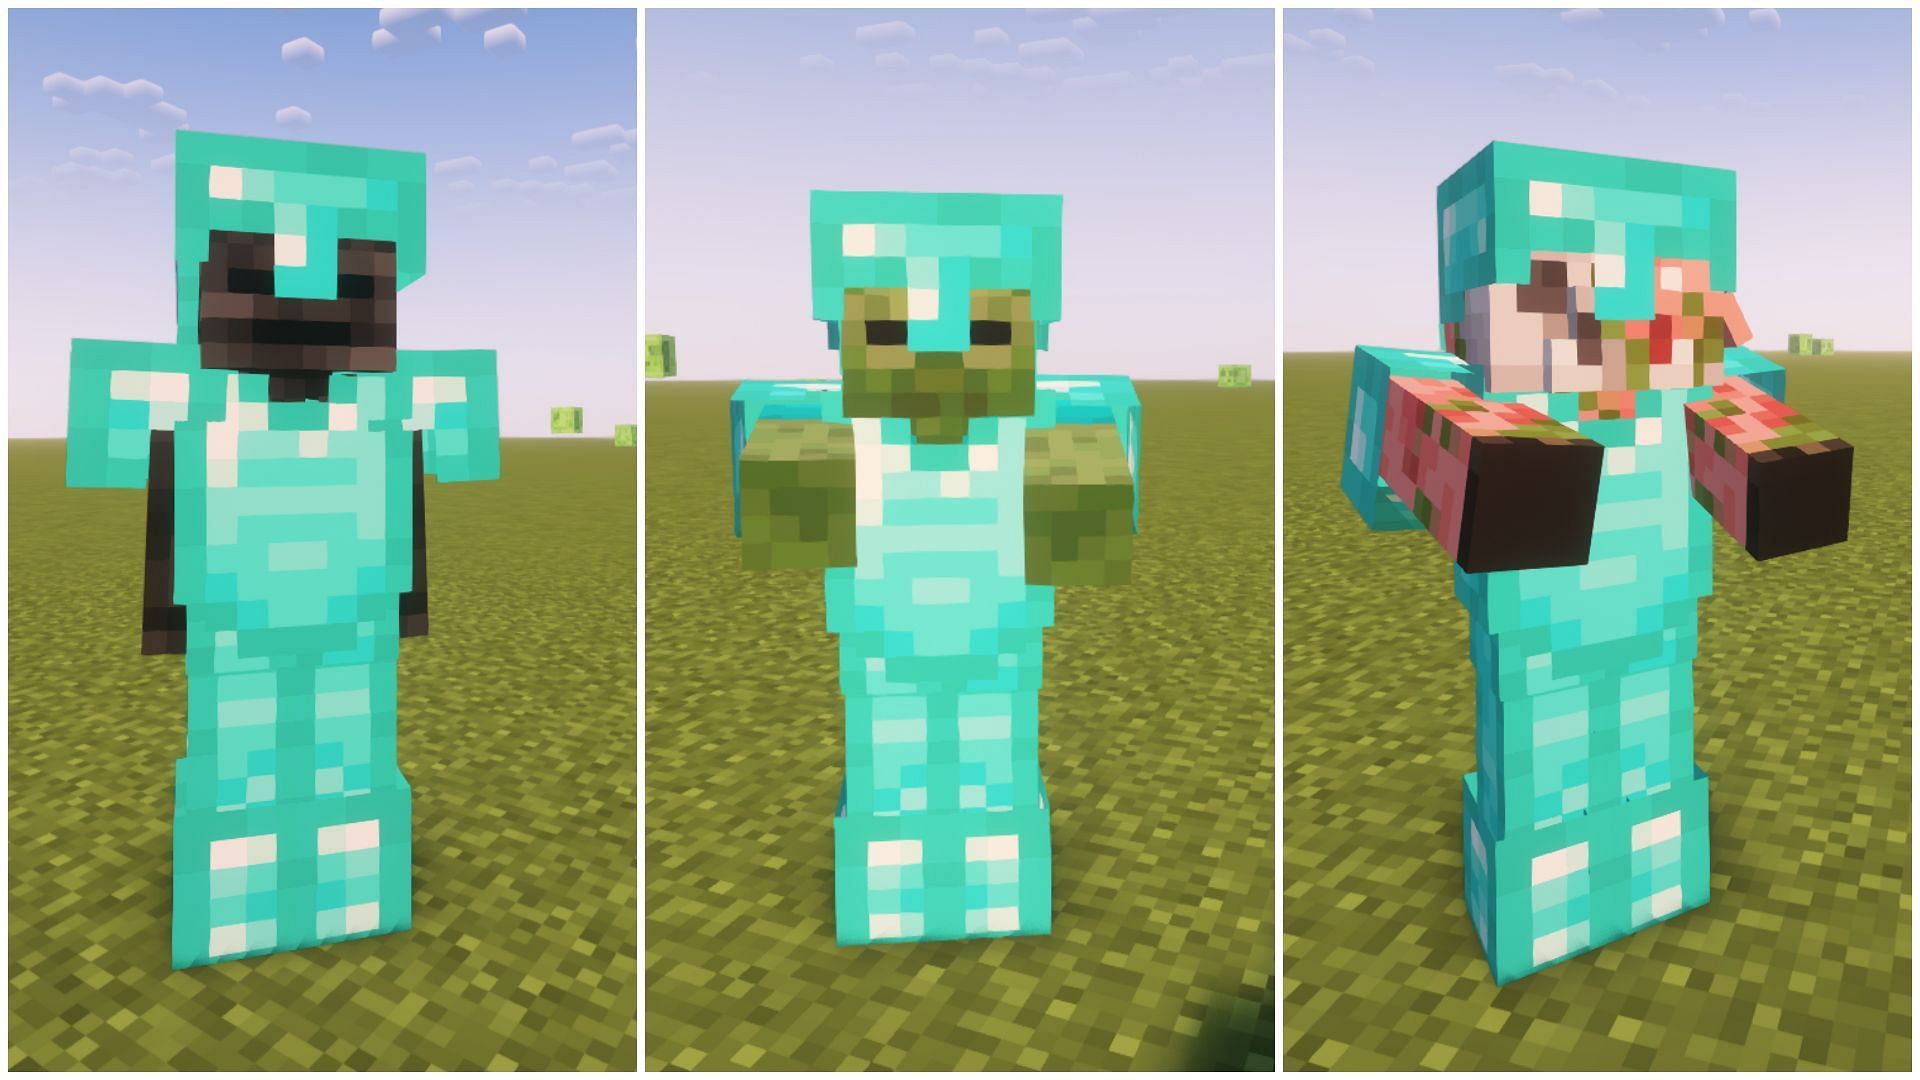 There are many mobs that can wear armor in Minecraft (Image via Sportskeeda)